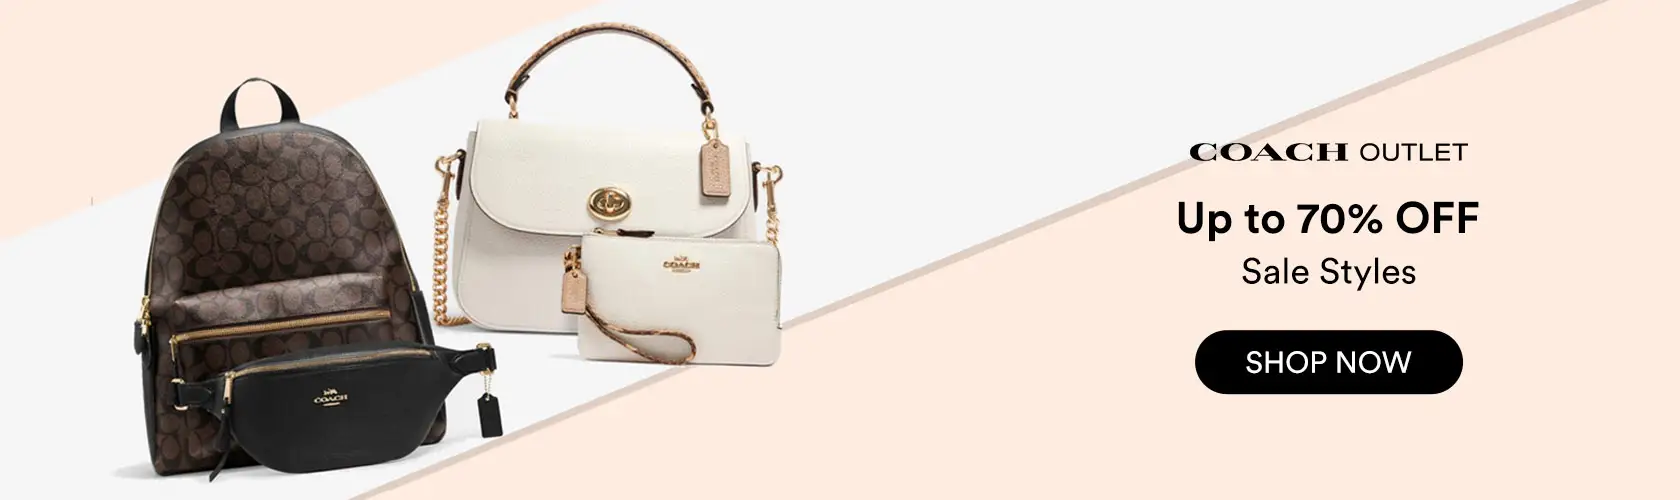 Coach Outlet: Up to 70% OFF Sale Styles